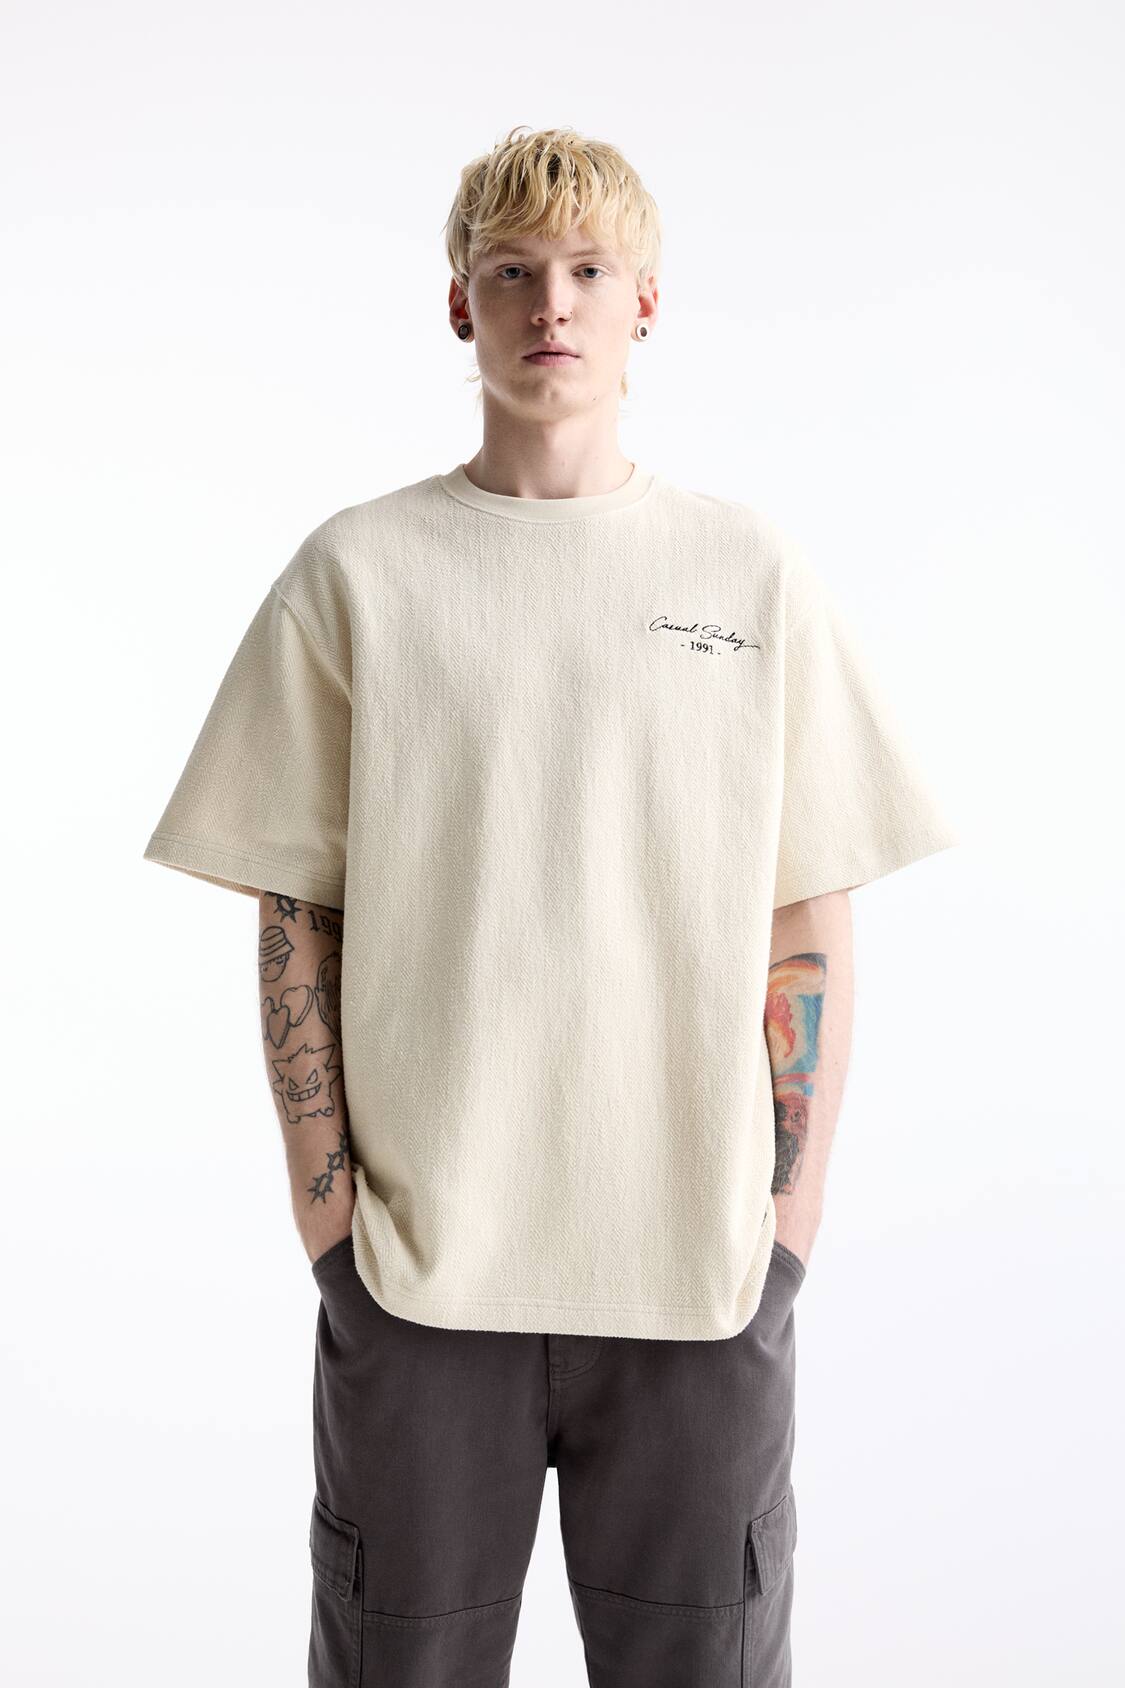 Textured plush T-shirt with embroidered slogan - pull&bear